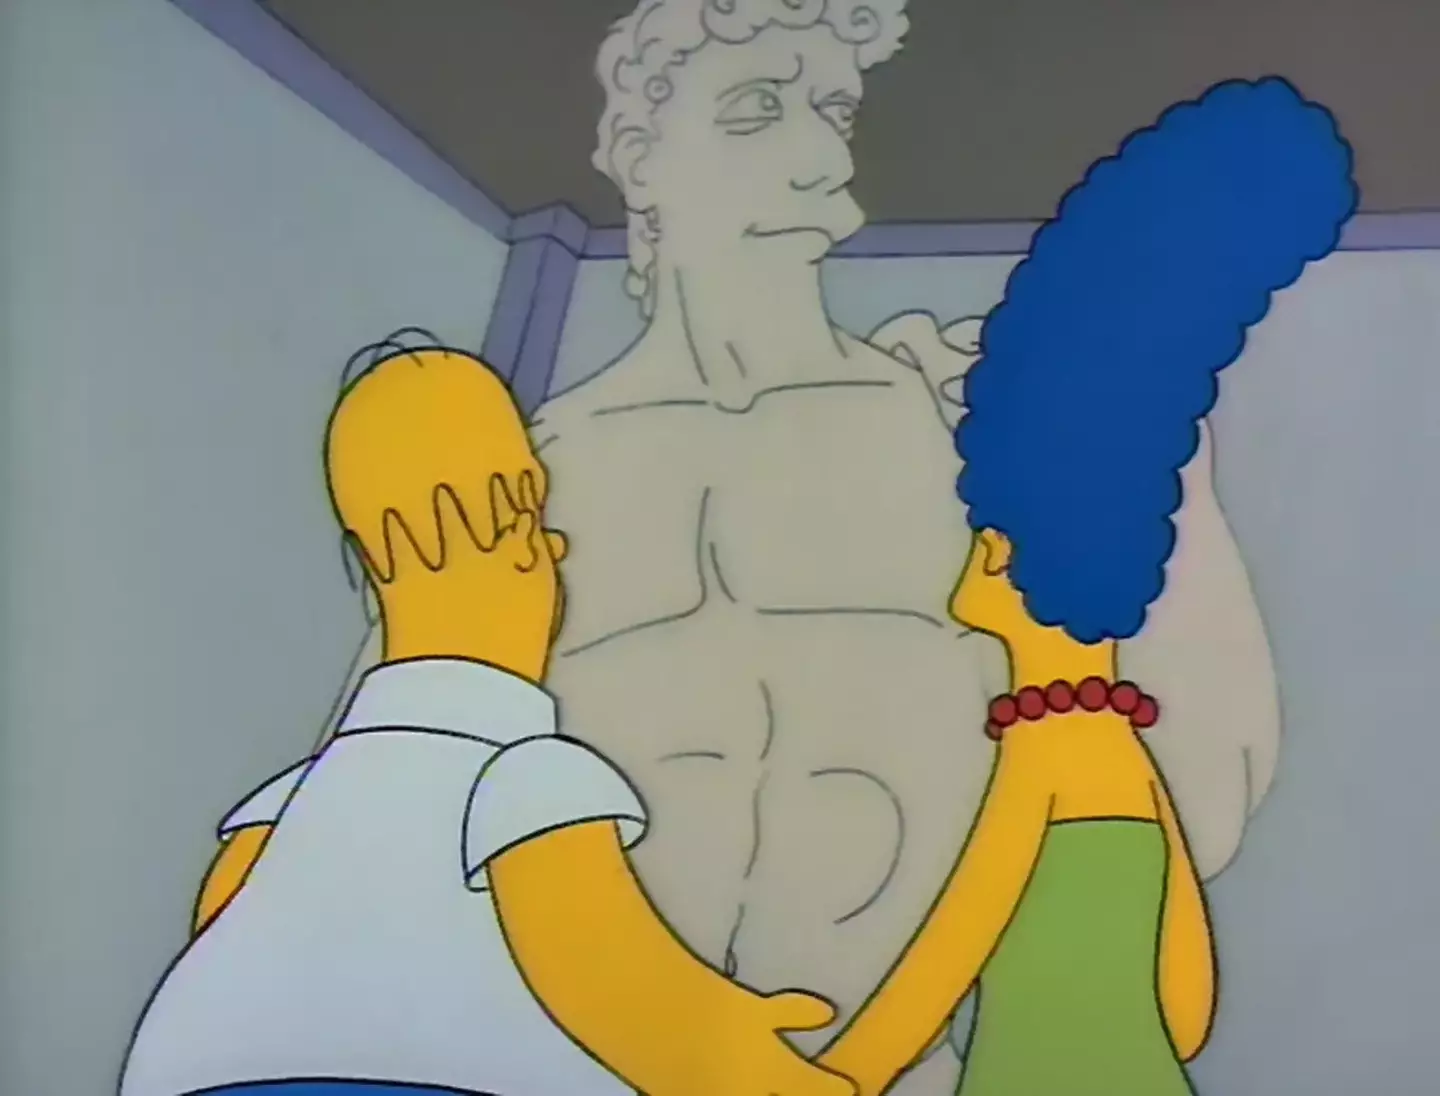 The Simpsons appeared to foreshadow the row over Michelangelo's David in Florida.